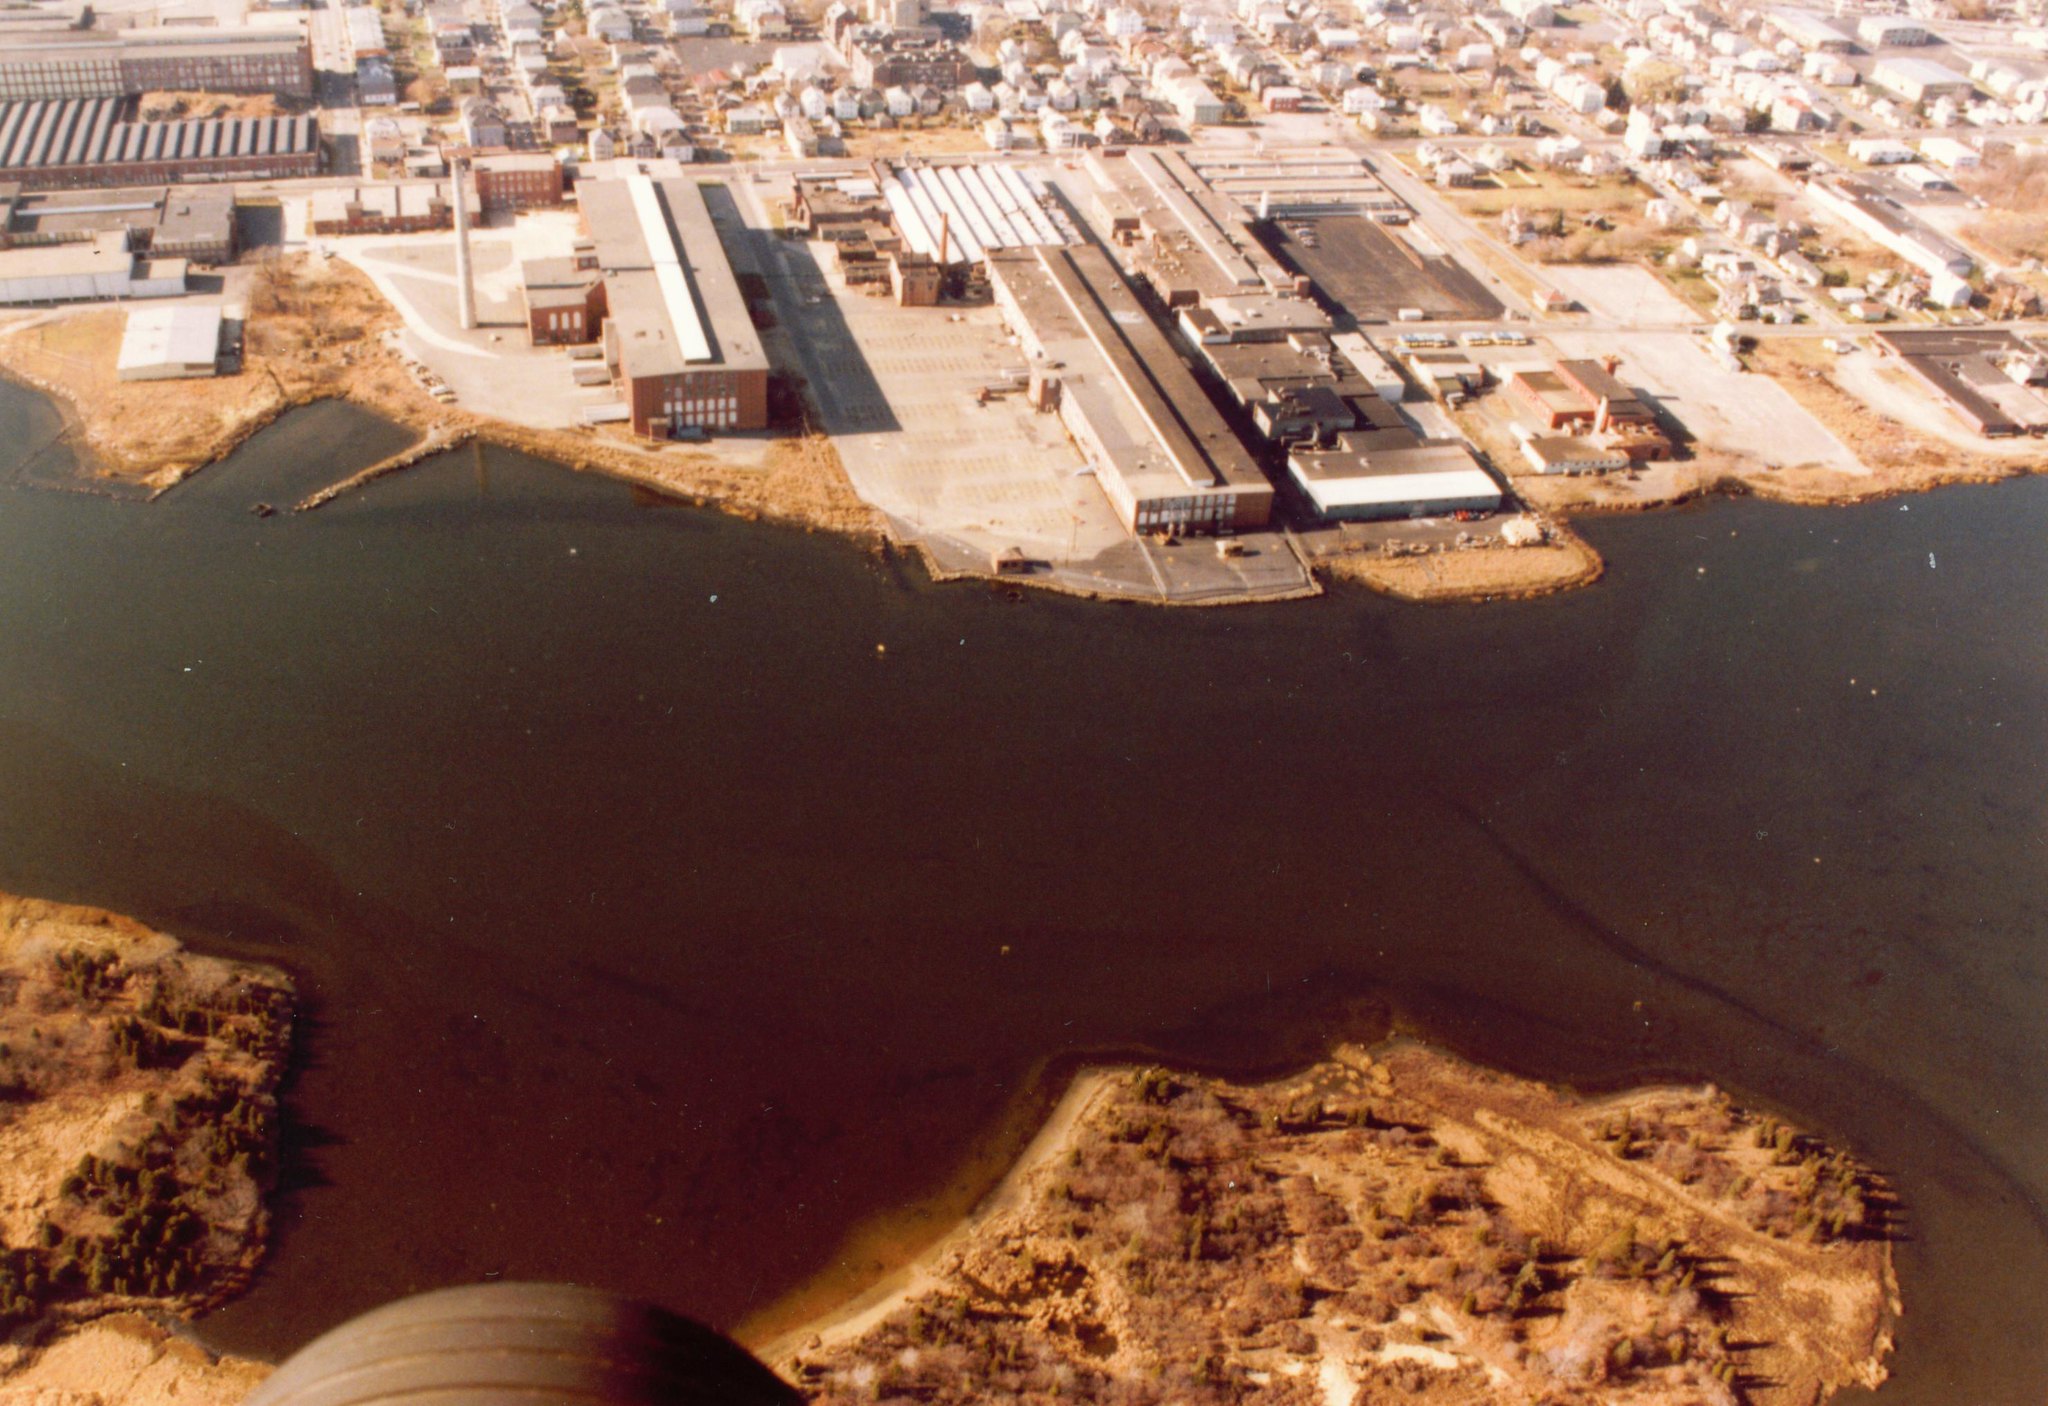 New Bedford's harbor was declared a Superfund site in 1983, three years after the federal remediation program was created.